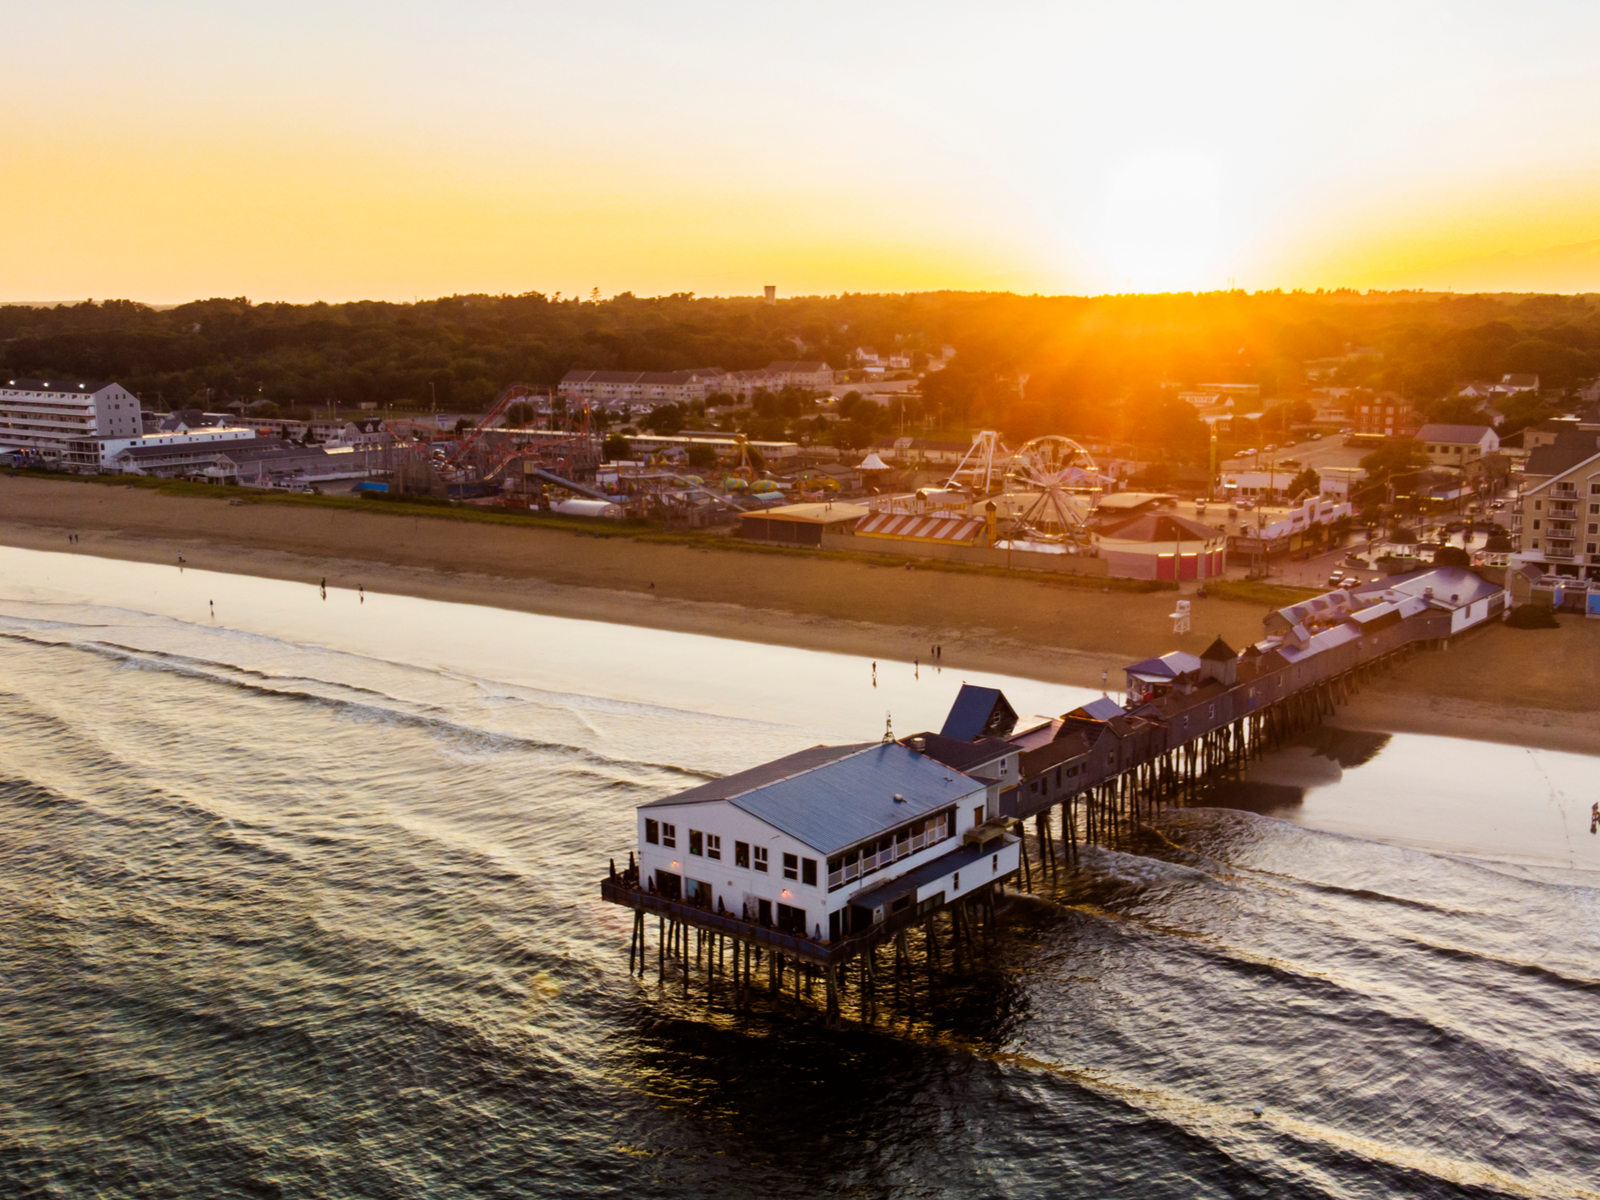 Sunset over the tranquil Old Orchard Beach in Maine, one of the best beaches on the East Coast, with its iconic structures on a boardwalk and a small amusement park offshore